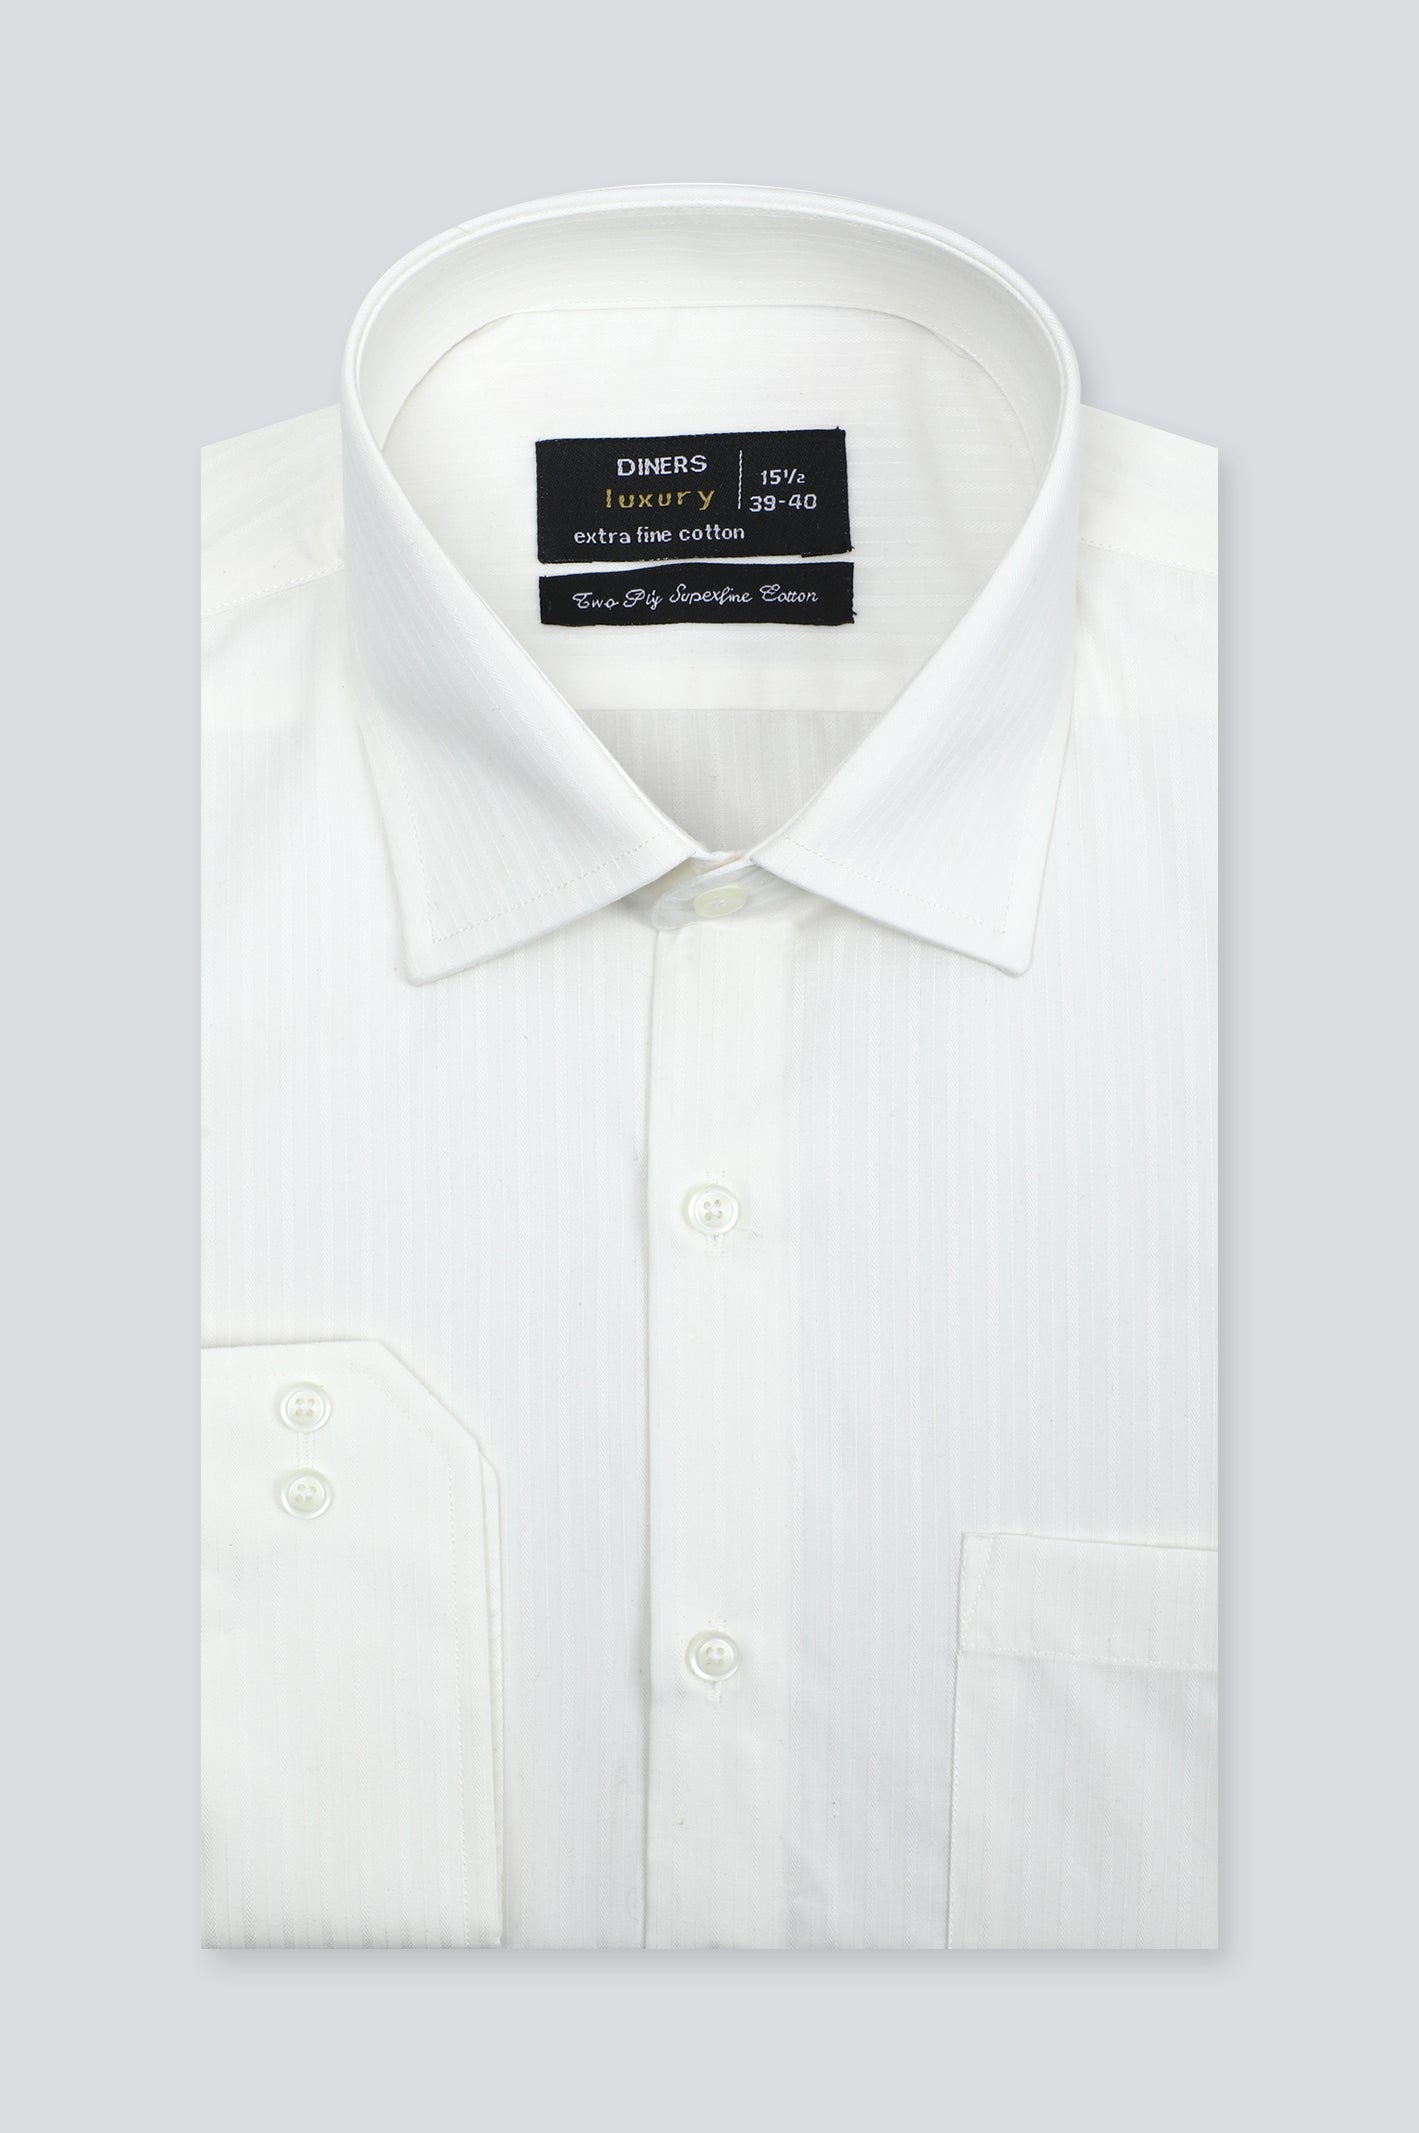 Off White Self Formal Men Shirt - Diners